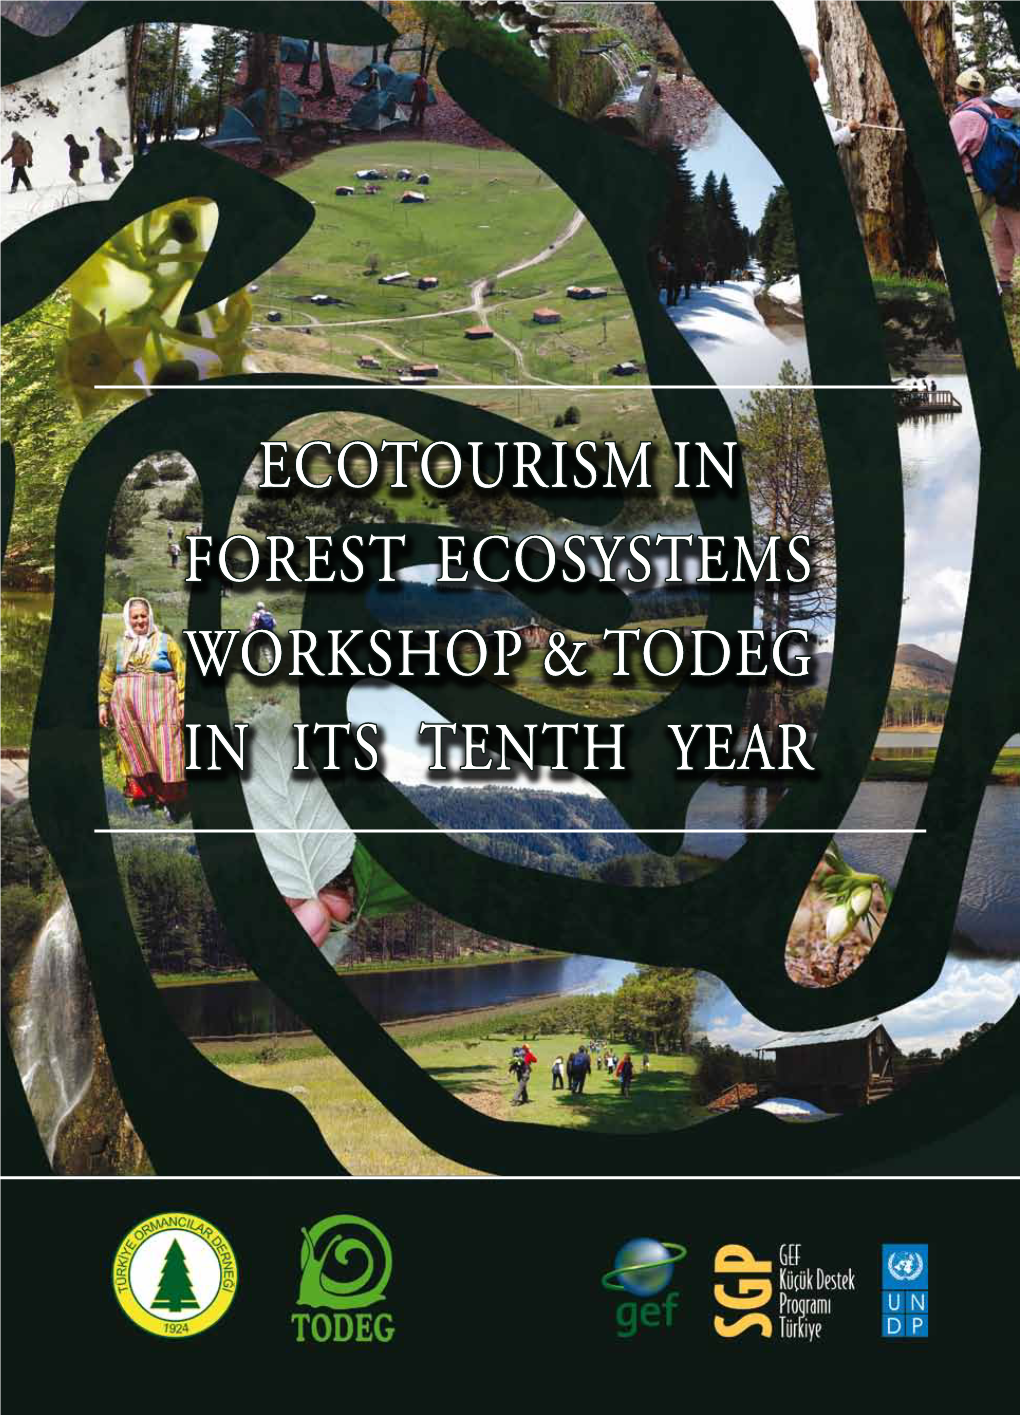 Ecotourism in Forest Ecosystems Workshop & Todeg in Its Tenth Year Ecotourism in Forest Ecosystems Workshop & Todeg in Its Tenth Year